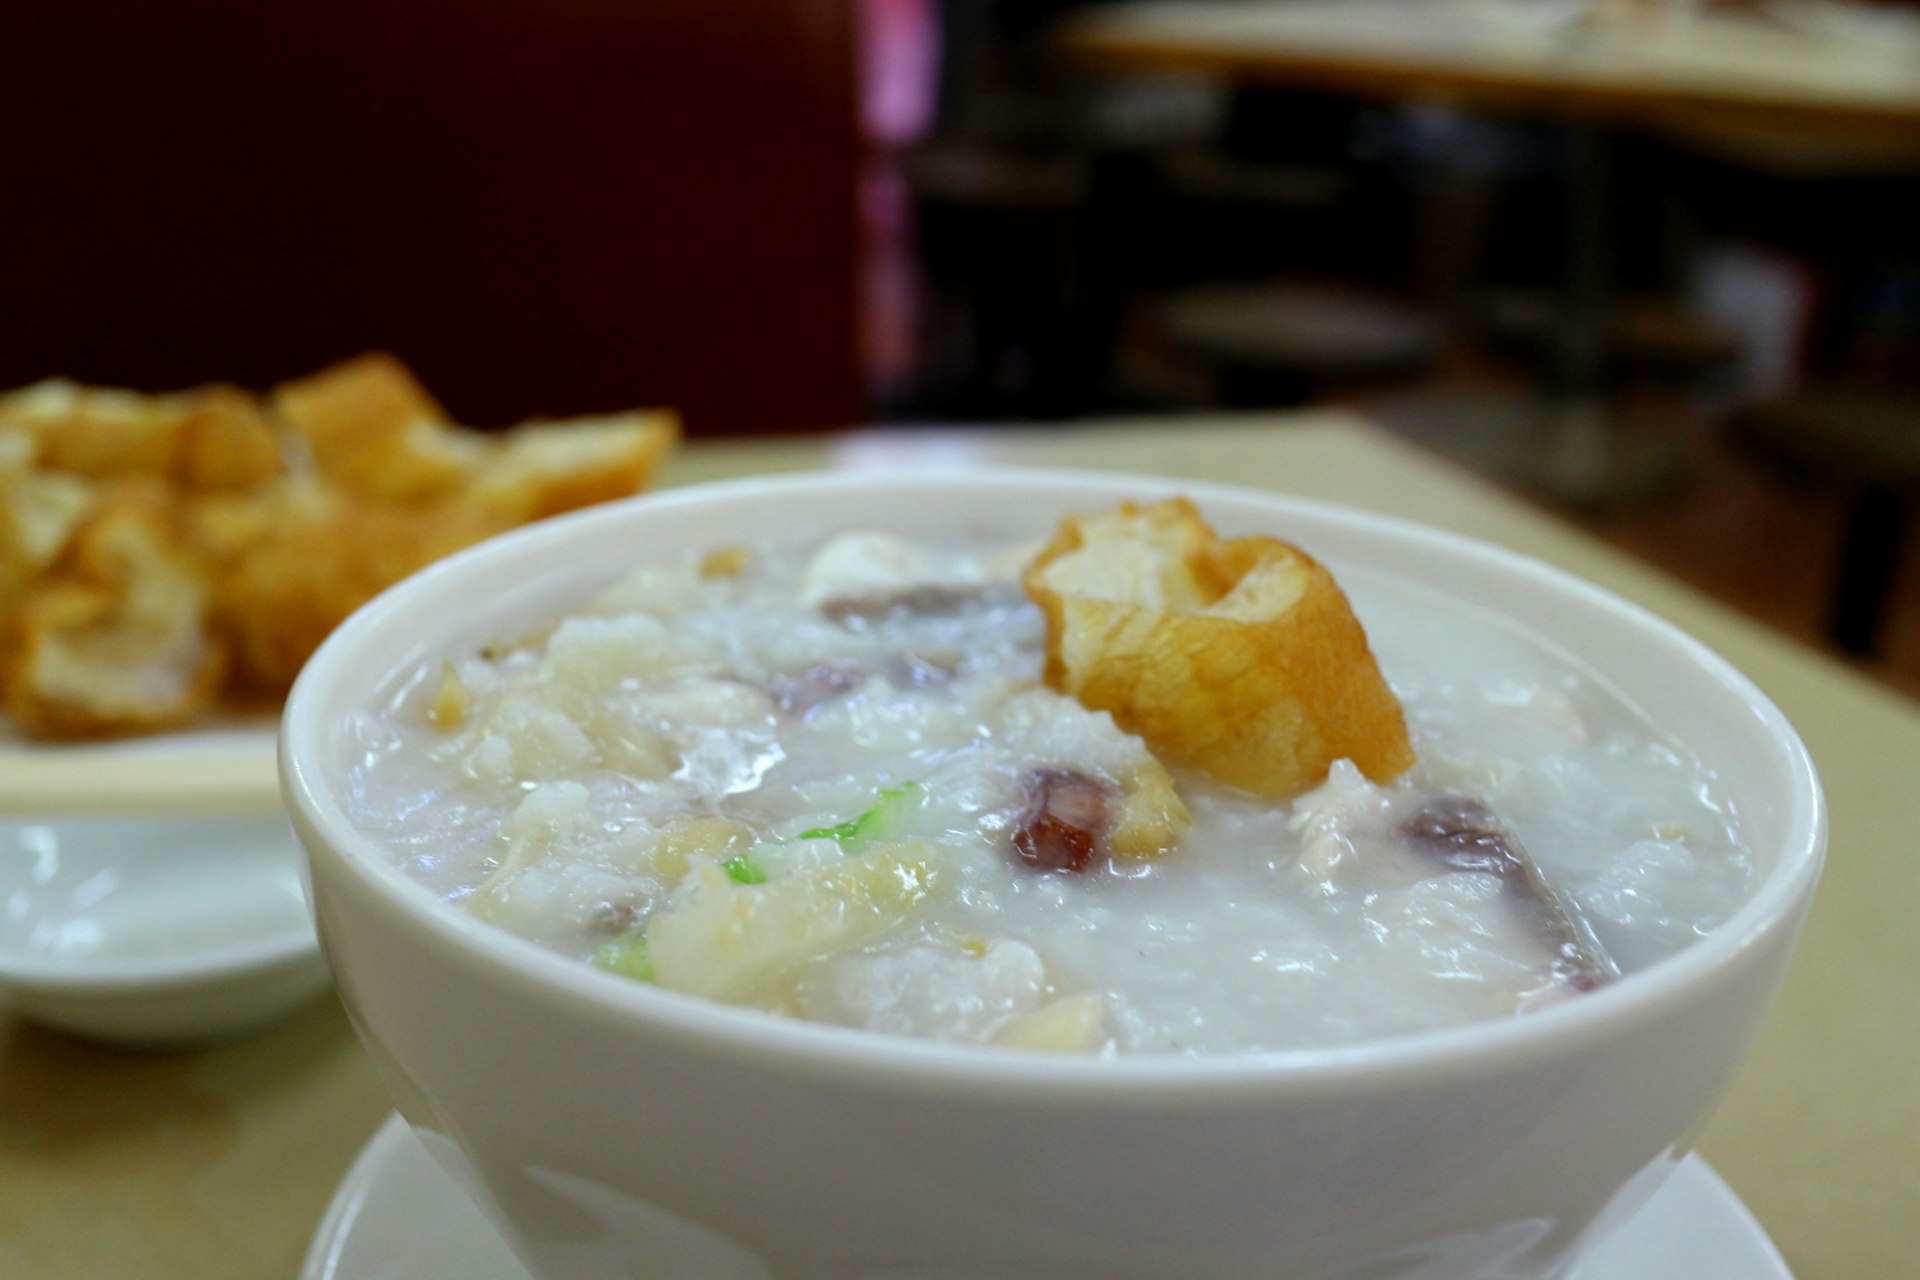 'Fisherfolk' congee with seafood and peanuts, and a side of Chinese crullers. Image by Piera Chen / Lonely Planet